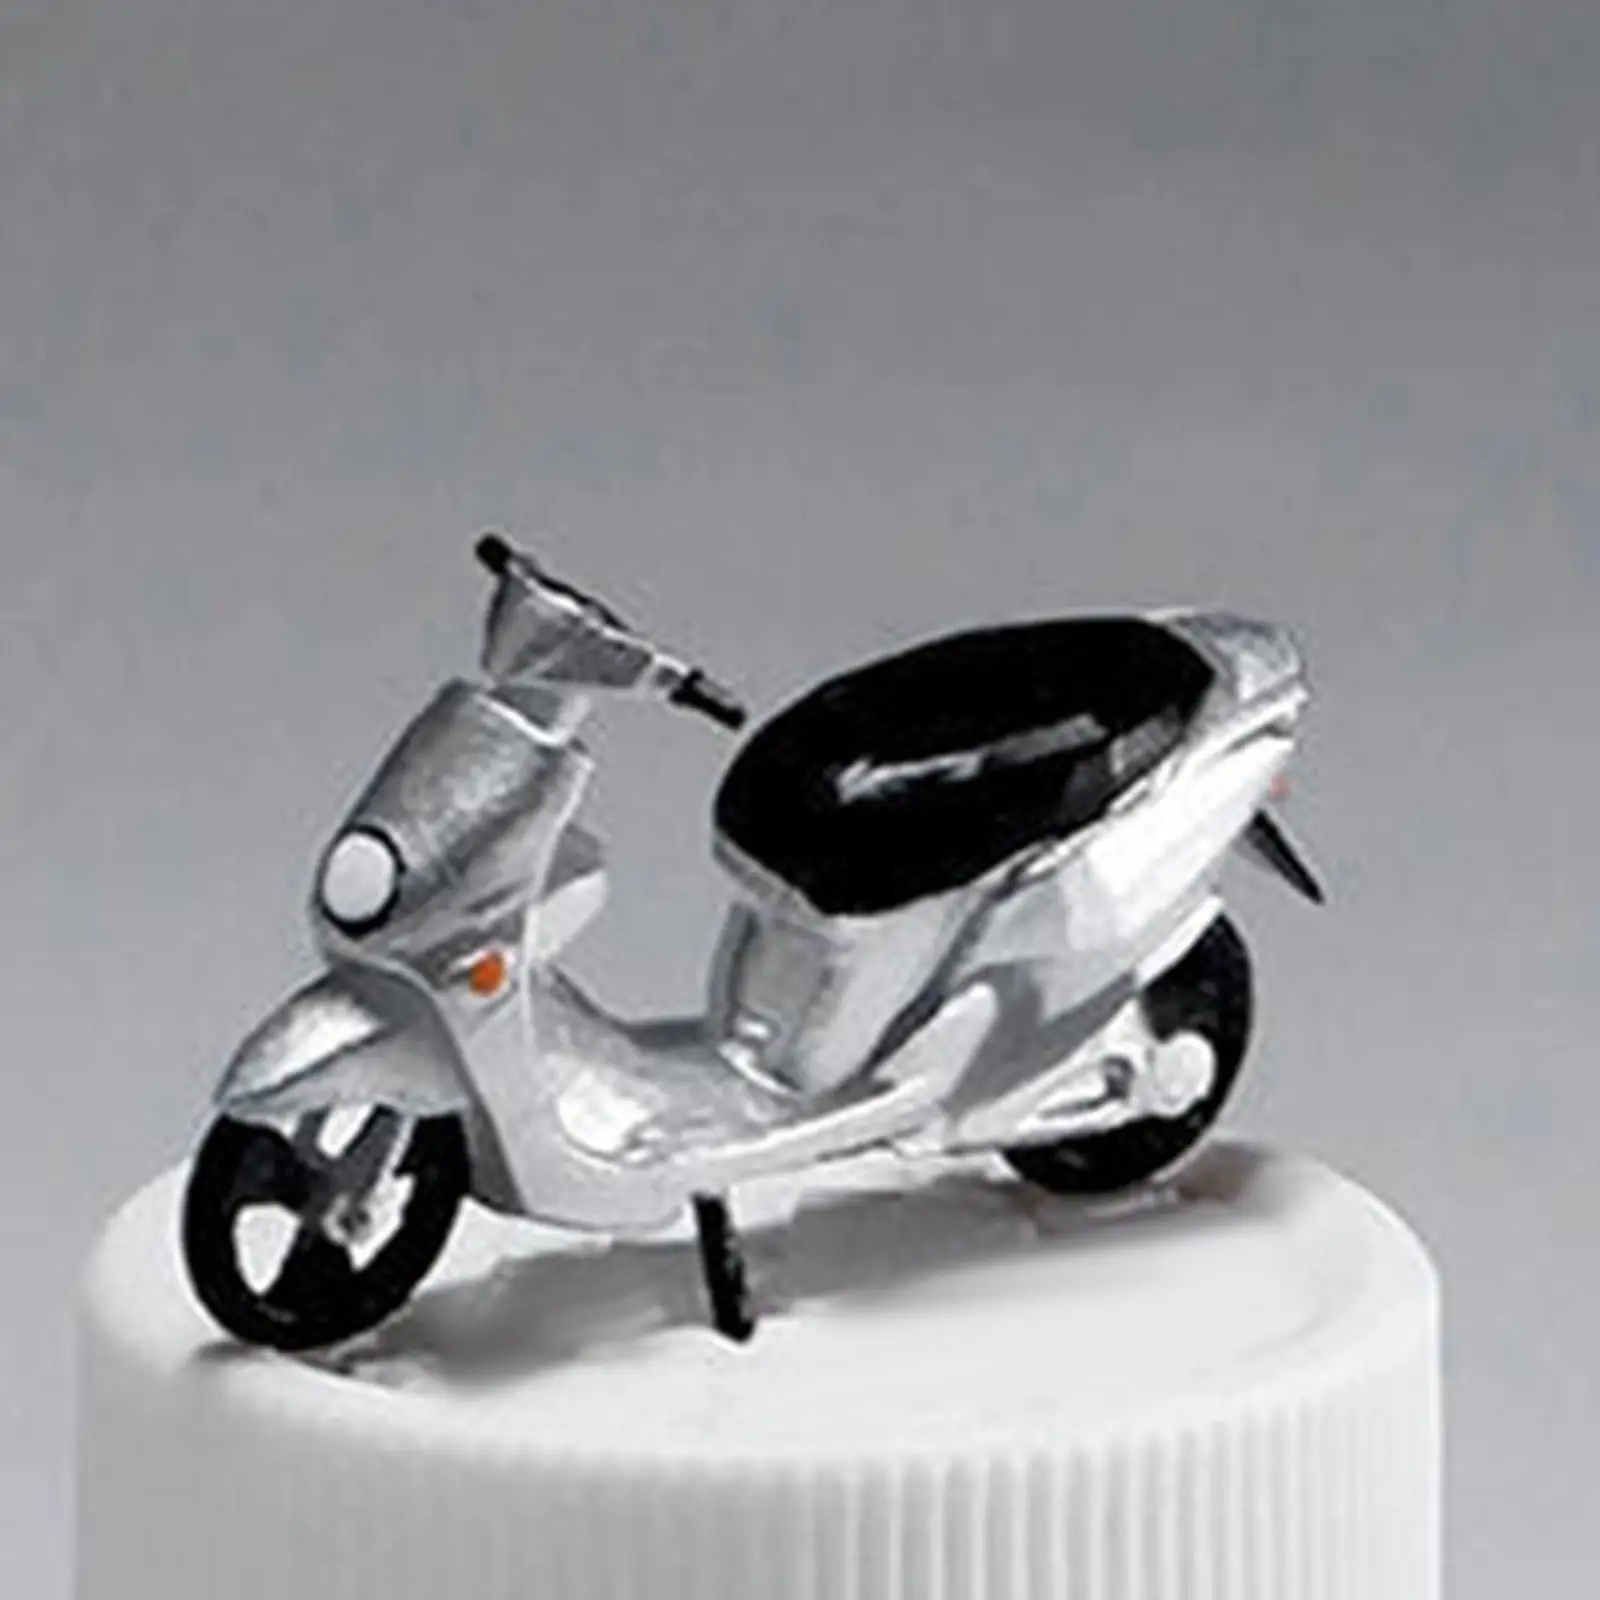 1:64 Scale Autocycle Model Ornament Hand Painted Resin Dollhouse Accessories